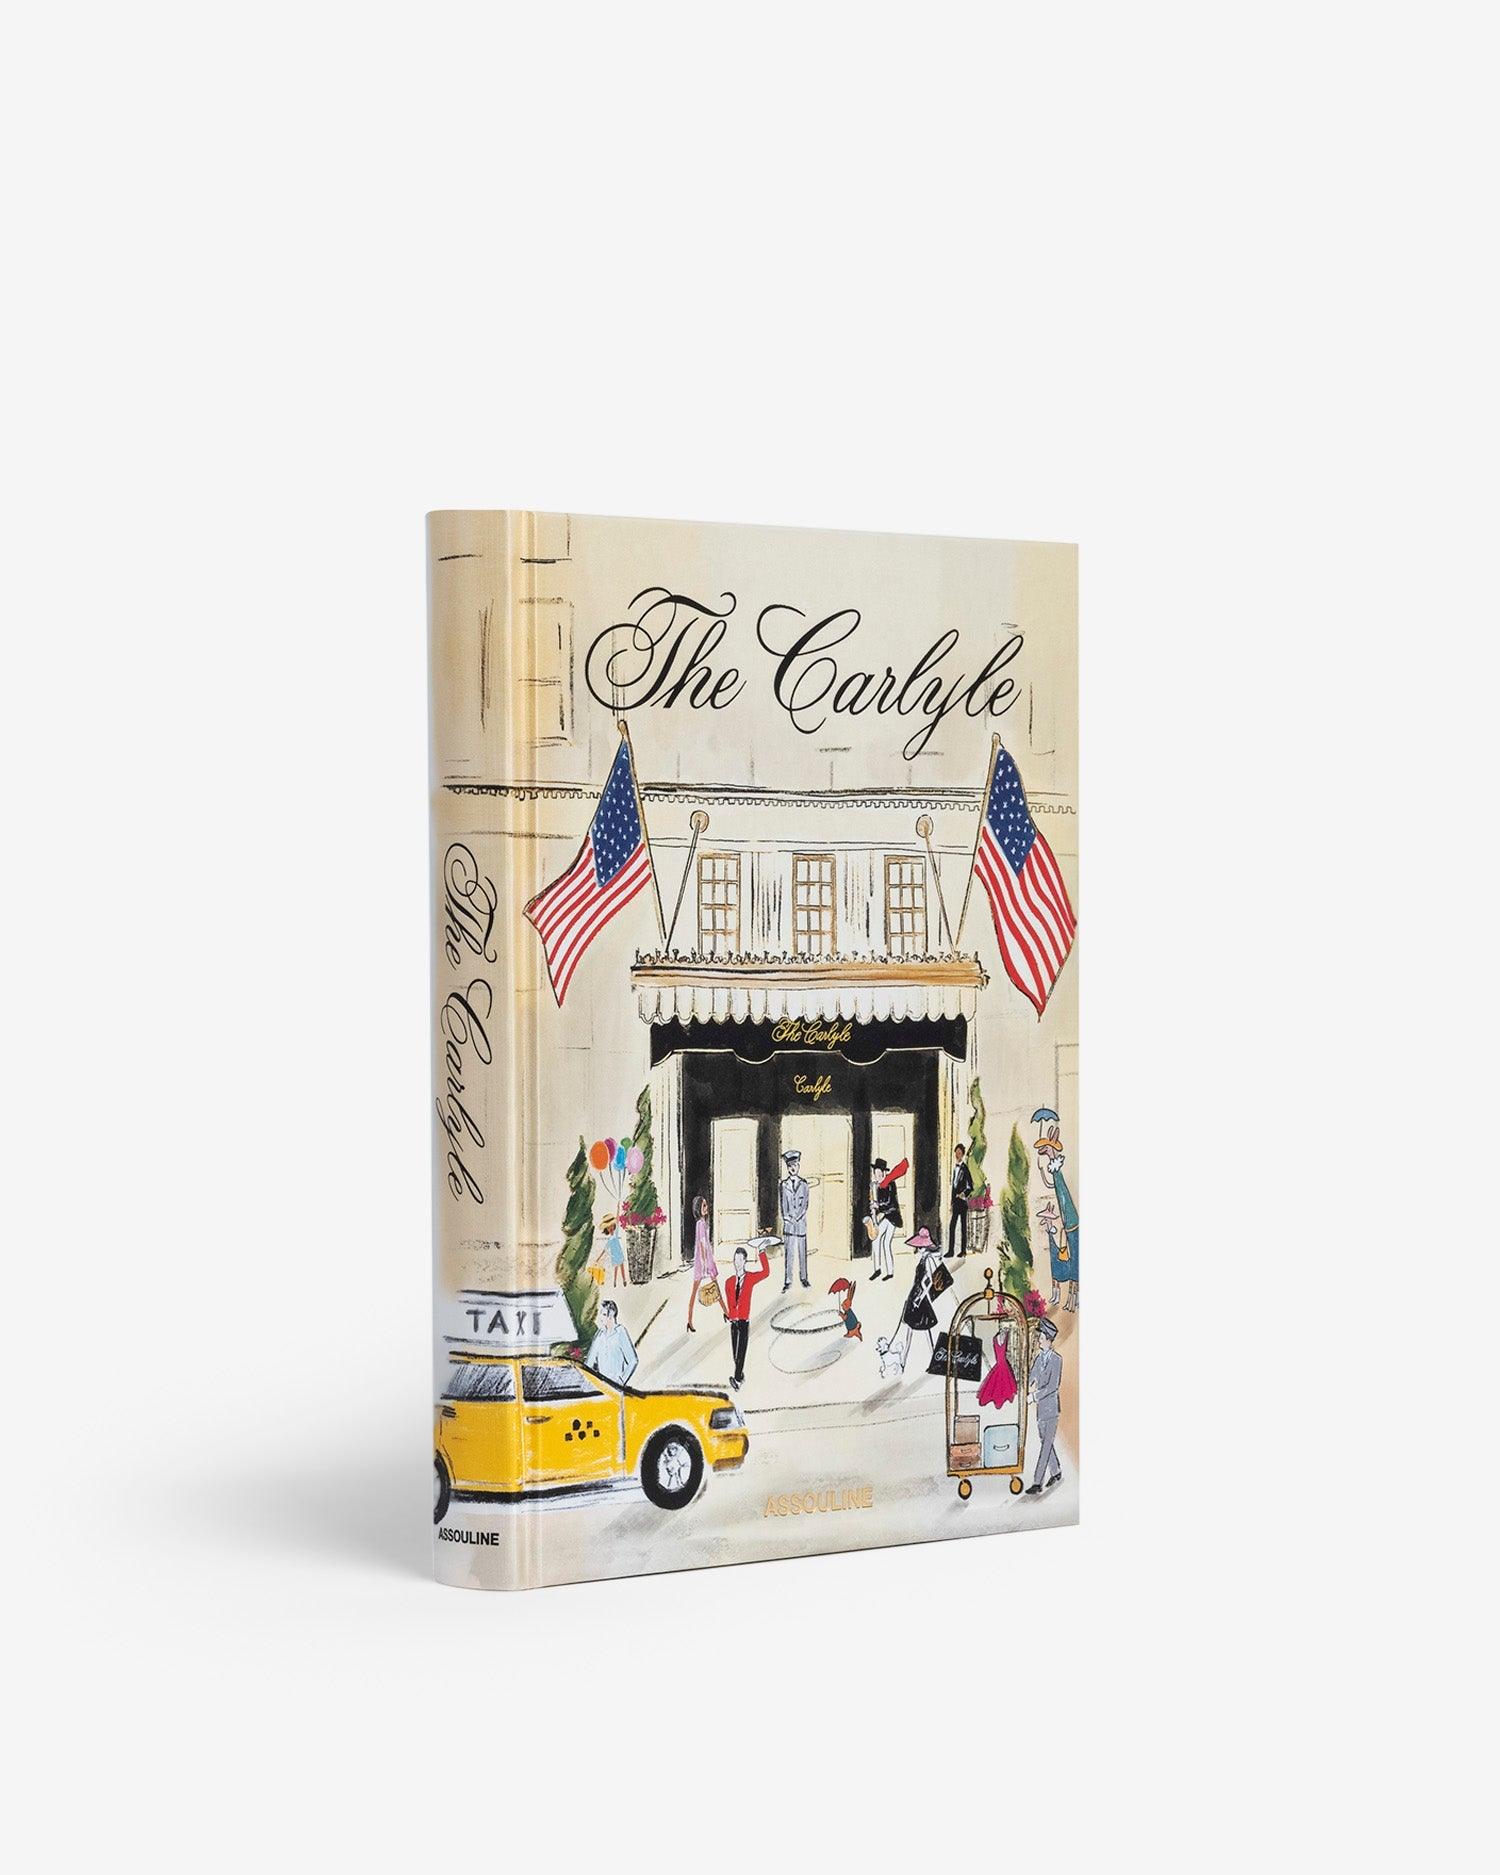 The Carlyle by James Reginato - Coffee Table Book | ASSOULINE